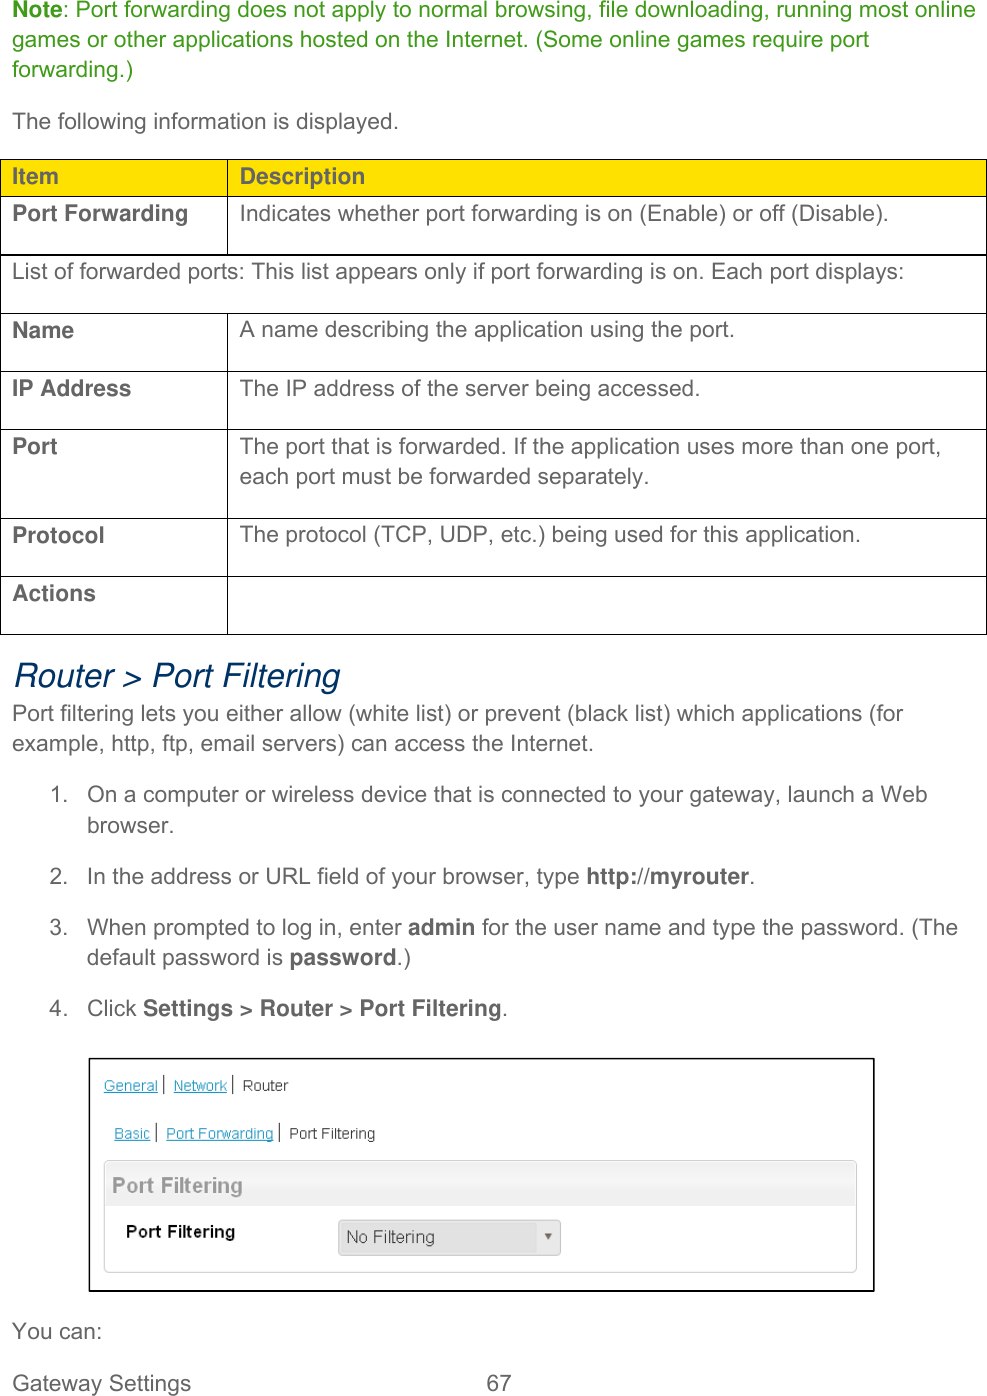 Gateway Settings  67   Note: Port forwarding does not apply to normal browsing, file downloading, running most online games or other applications hosted on the Internet. (Some online games require port forwarding.) The following information is displayed. Item  Description Port Forwarding Indicates whether port forwarding is on (Enable) or off (Disable). List of forwarded ports: This list appears only if port forwarding is on. Each port displays: Name  A name describing the application using the port. IP Address  The IP address of the server being accessed. Port  The port that is forwarded. If the application uses more than one port, each port must be forwarded separately. Protocol  The protocol (TCP, UDP, etc.) being used for this application. Actions   Router &gt; Port Filtering Port filtering lets you either allow (white list) or prevent (black list) which applications (for example, http, ftp, email servers) can access the Internet.  1.  On a computer or wireless device that is connected to your gateway, launch a Web browser. 2.  In the address or URL field of your browser, type http://myrouter.  3.  When prompted to log in, enter admin for the user name and type the password. (The default password is password.) 4. Click Settings &gt; Router &gt; Port Filtering.   You can: 